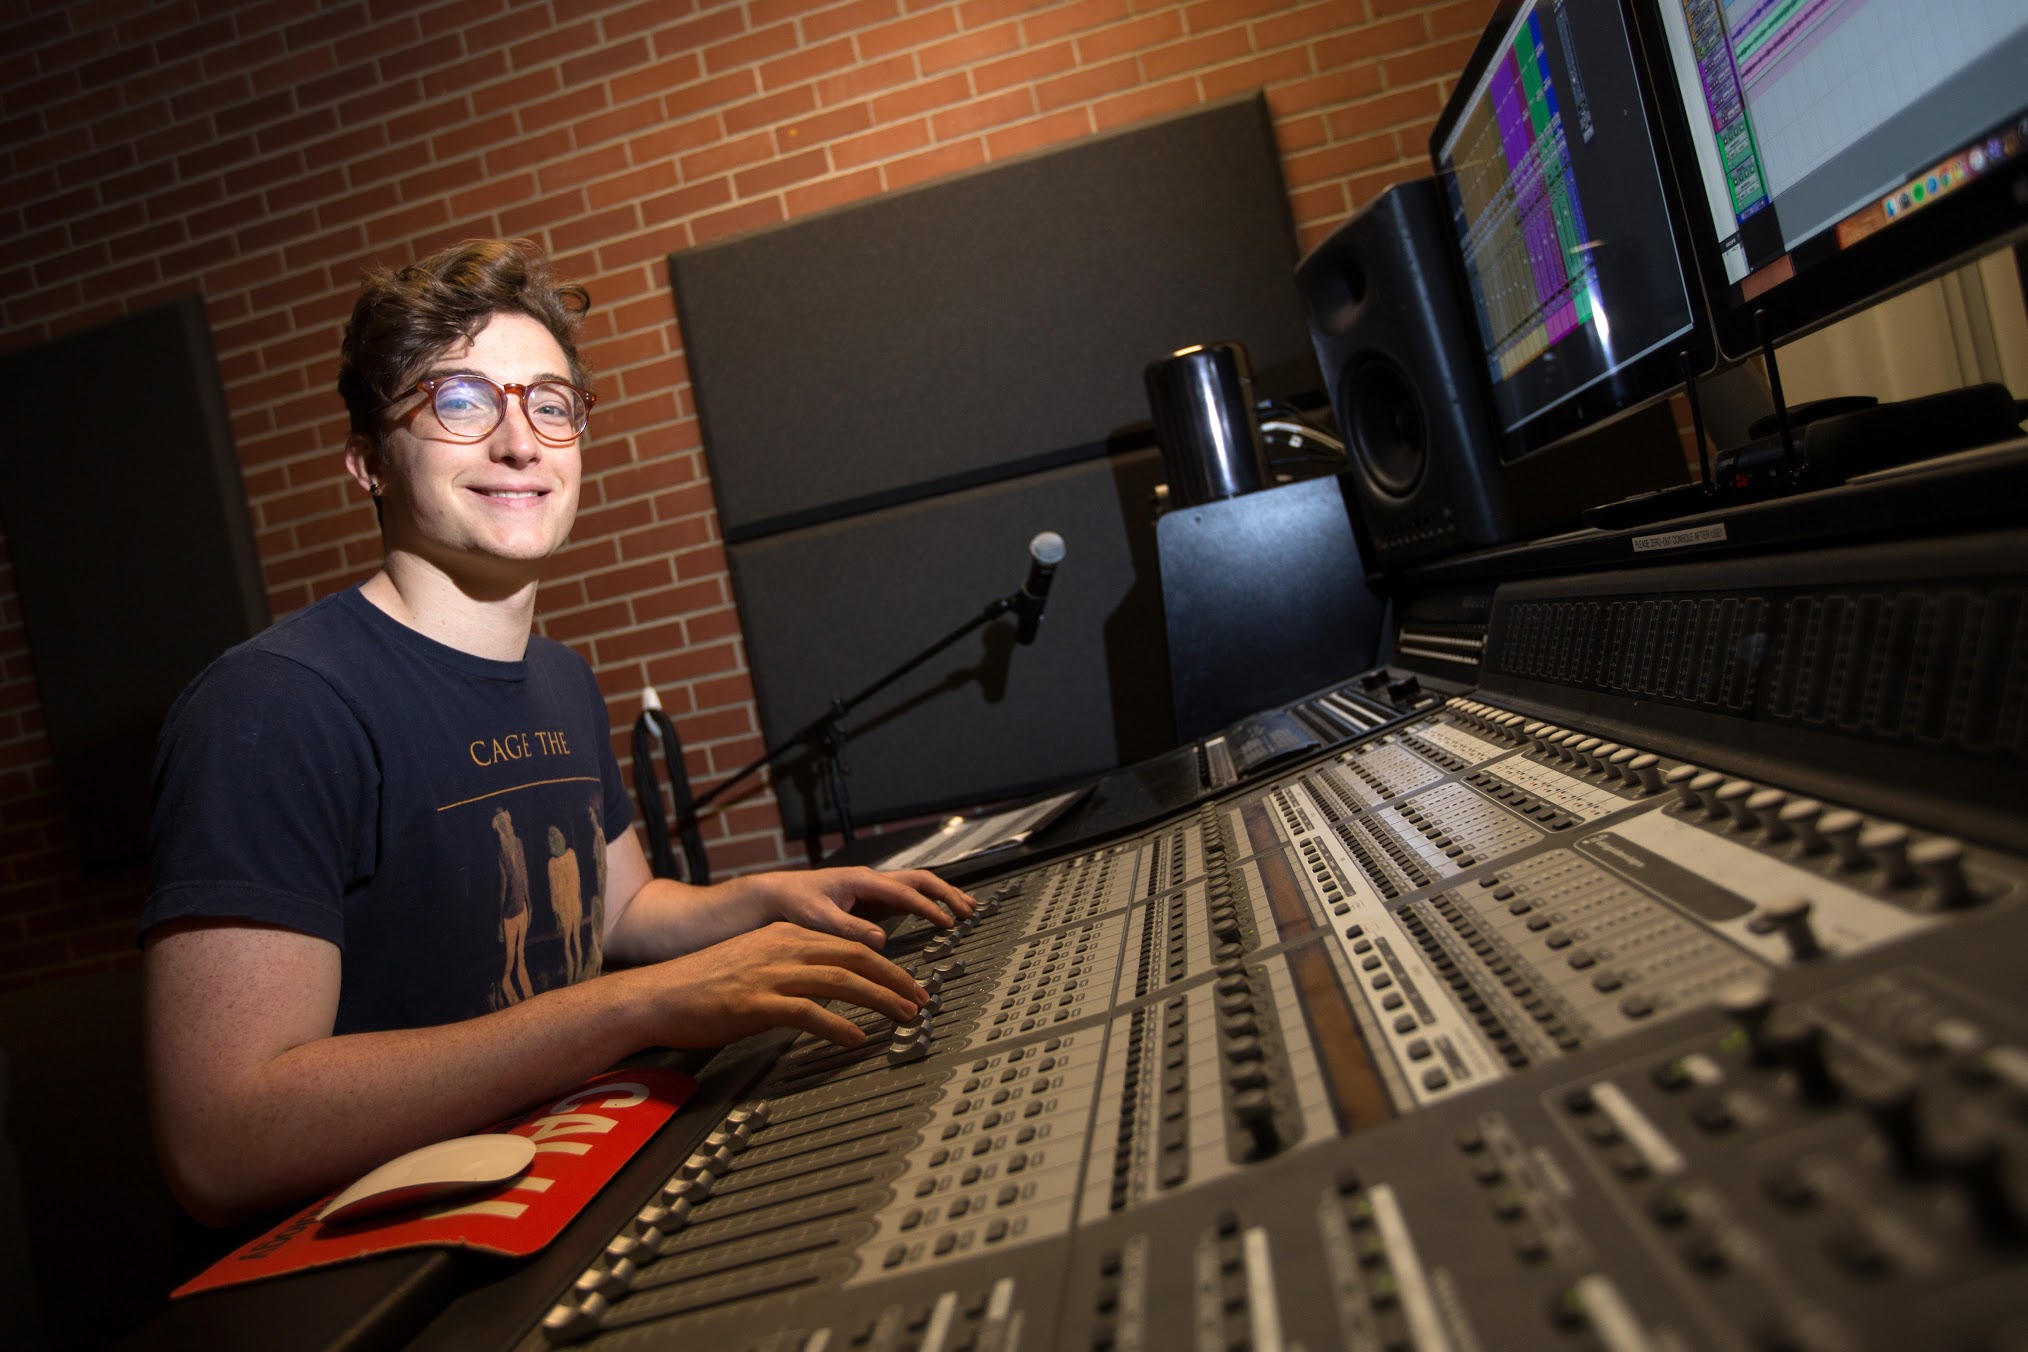 A commercial music student prepares for a career.